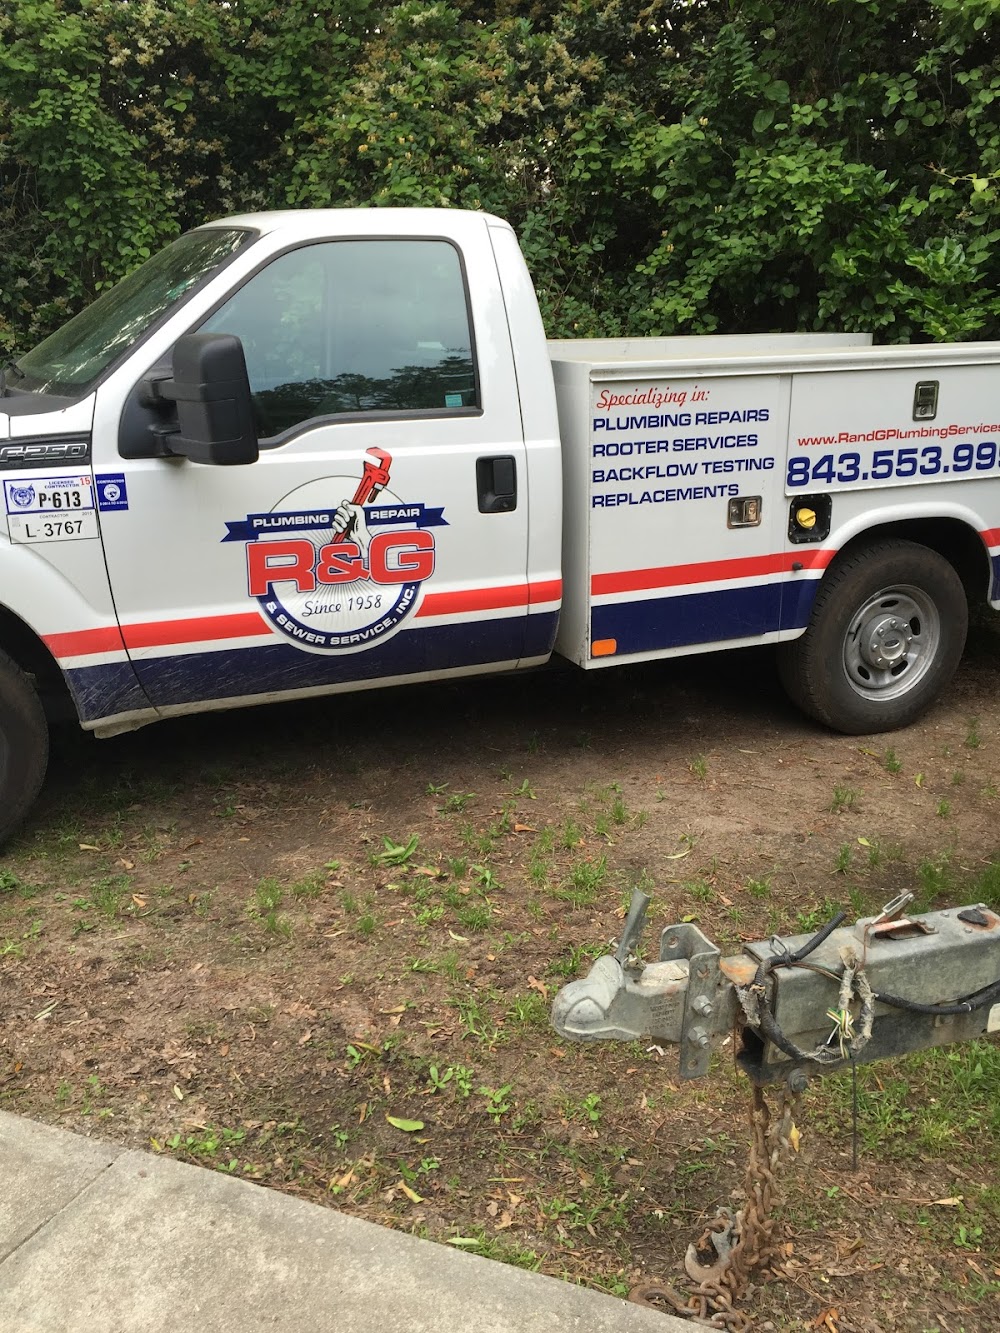 R&G Plumbing & Sewer Services Inc.